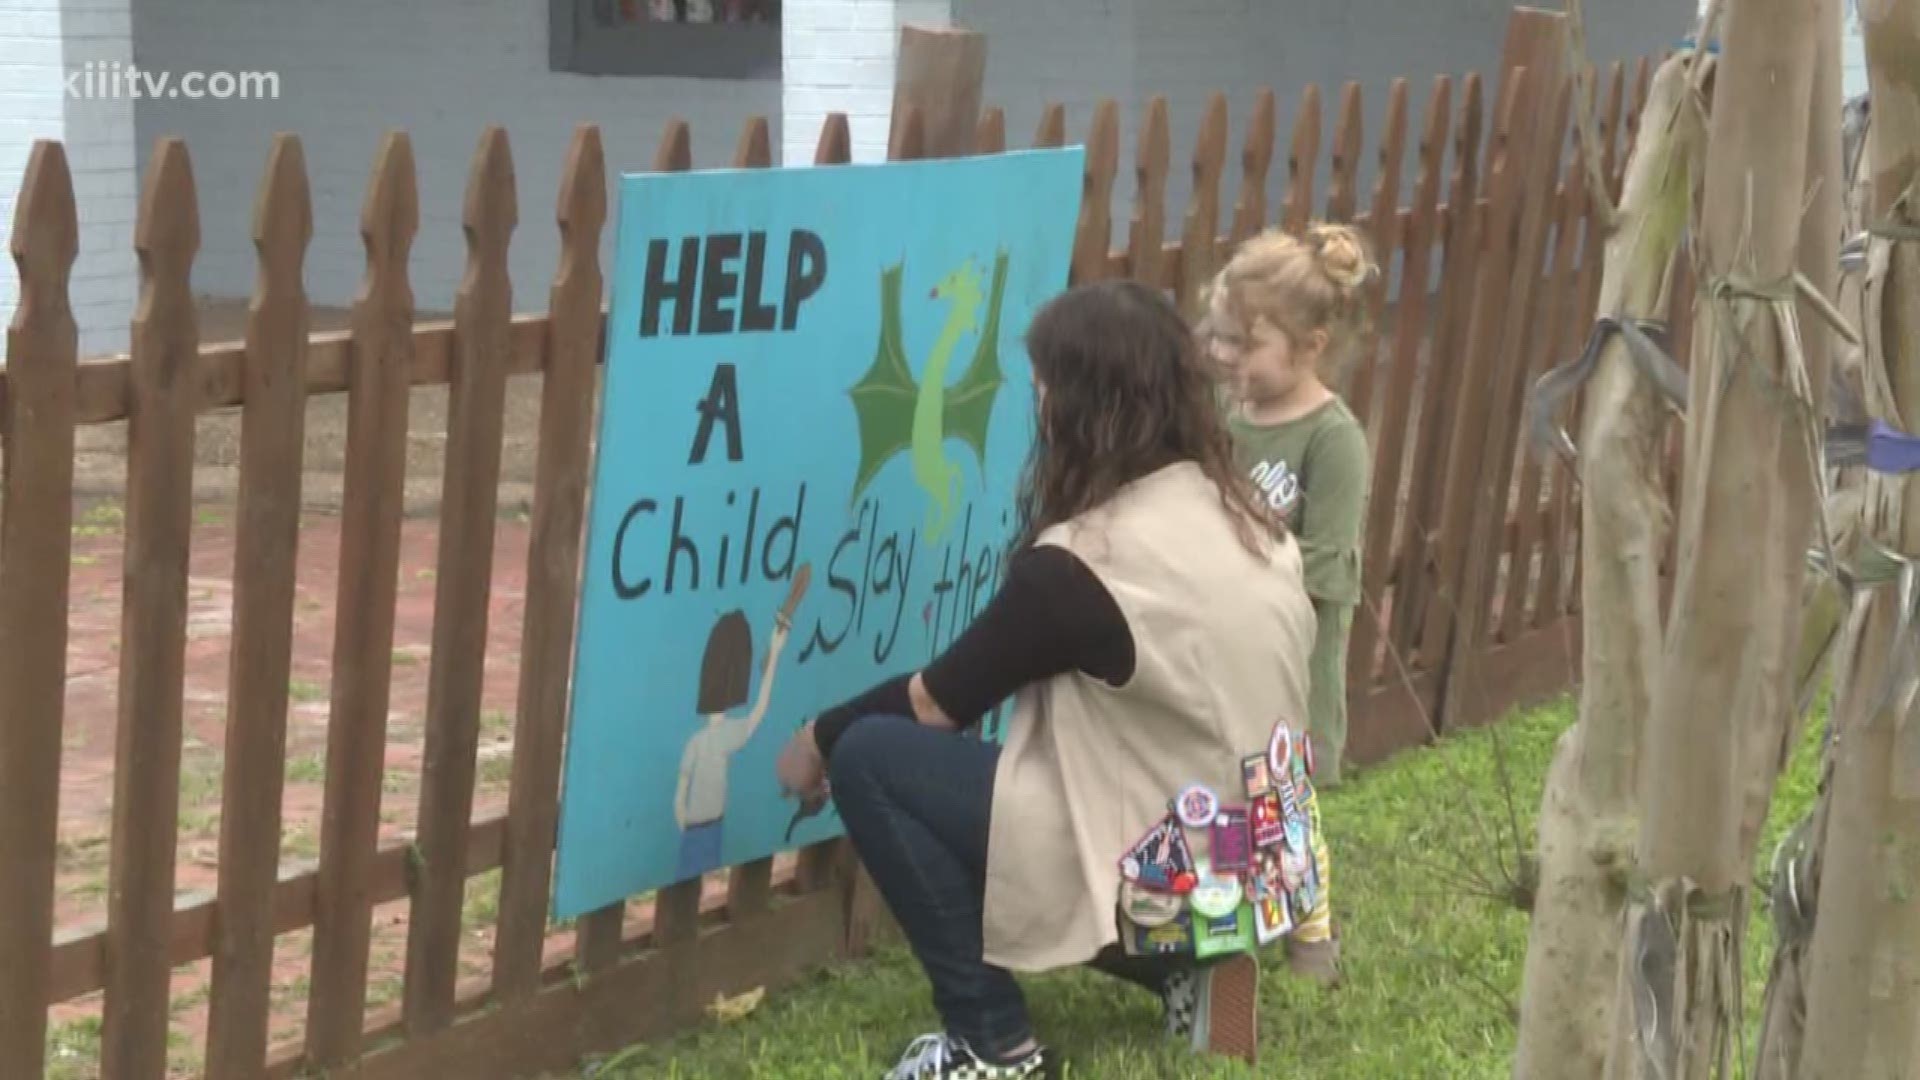 A Coastal Bend Girl Scout is trying to make life a little brighter for kids in foster care.